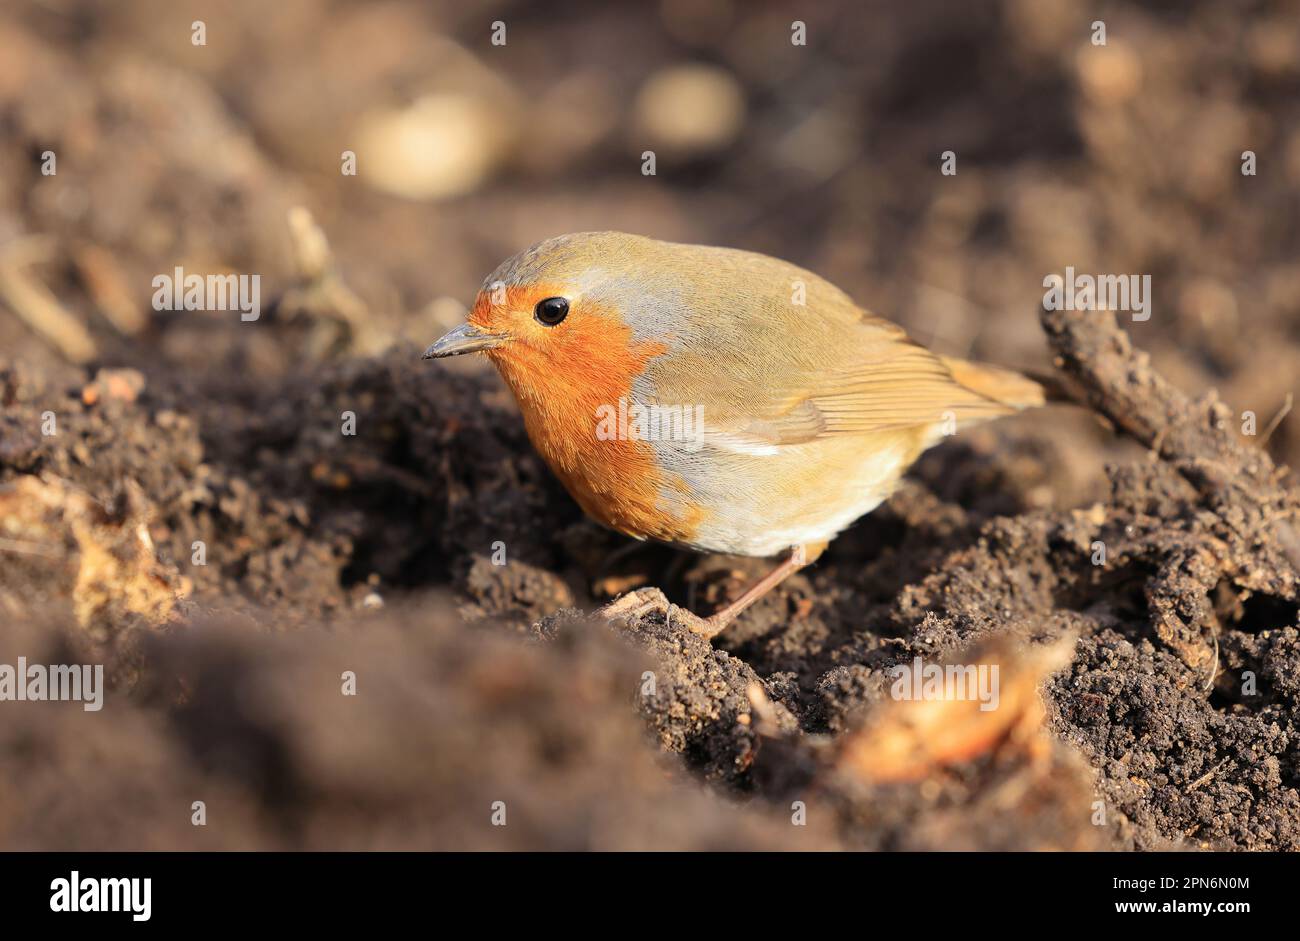 The Robin redbreast (Erithacus rubecula) a British bird that is fiercefully territorial, singing to defend their territory all year round. Stock Photo